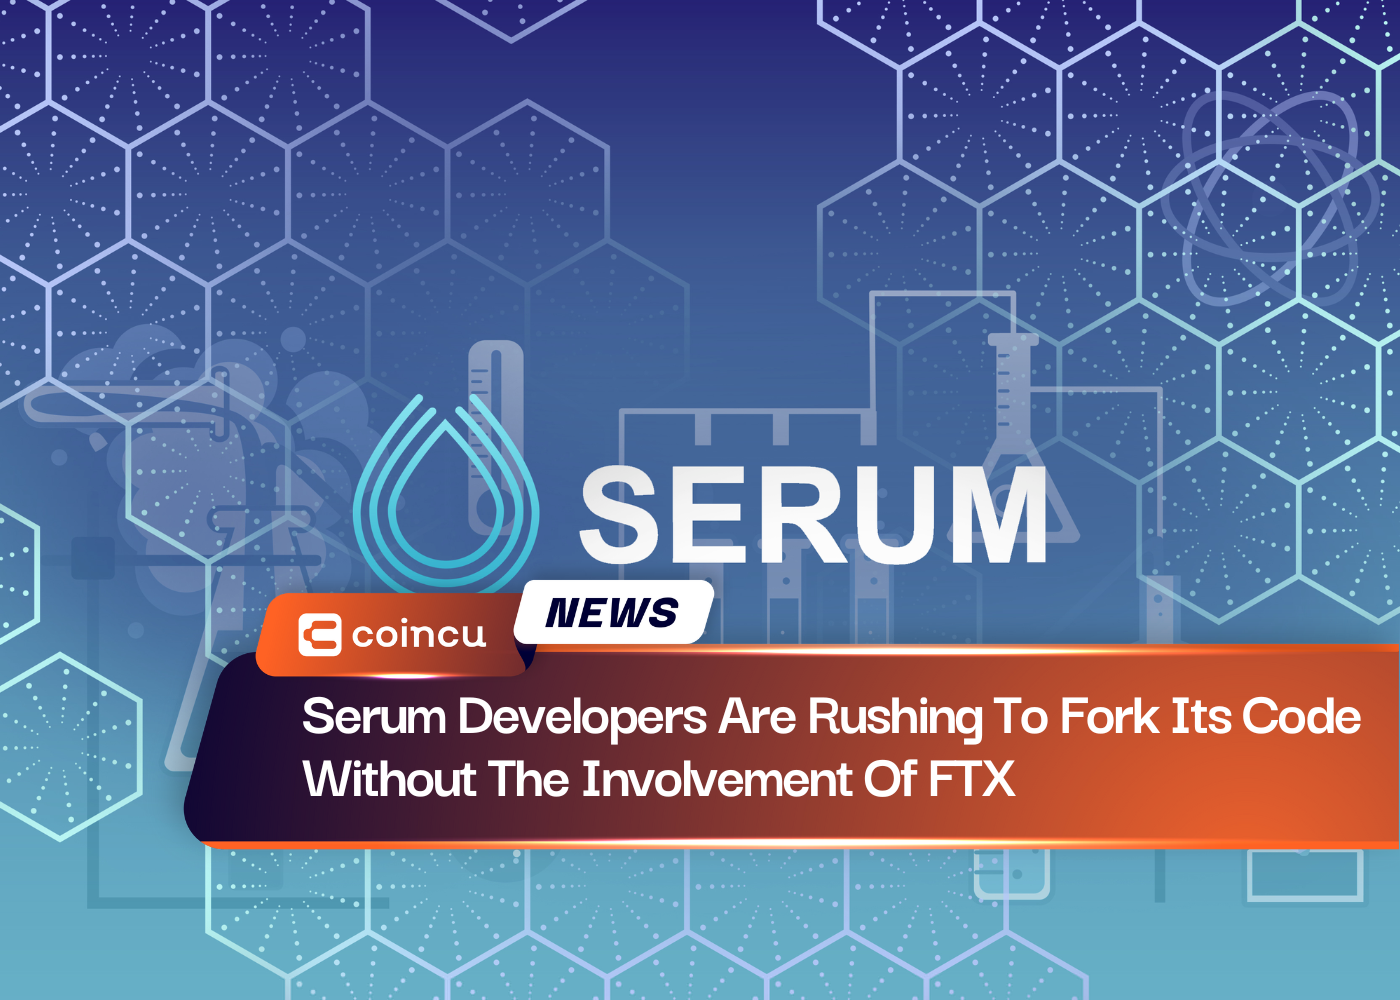 Serum Developers Are Rushing To Fork Its Code Without The Involvement Of FTX